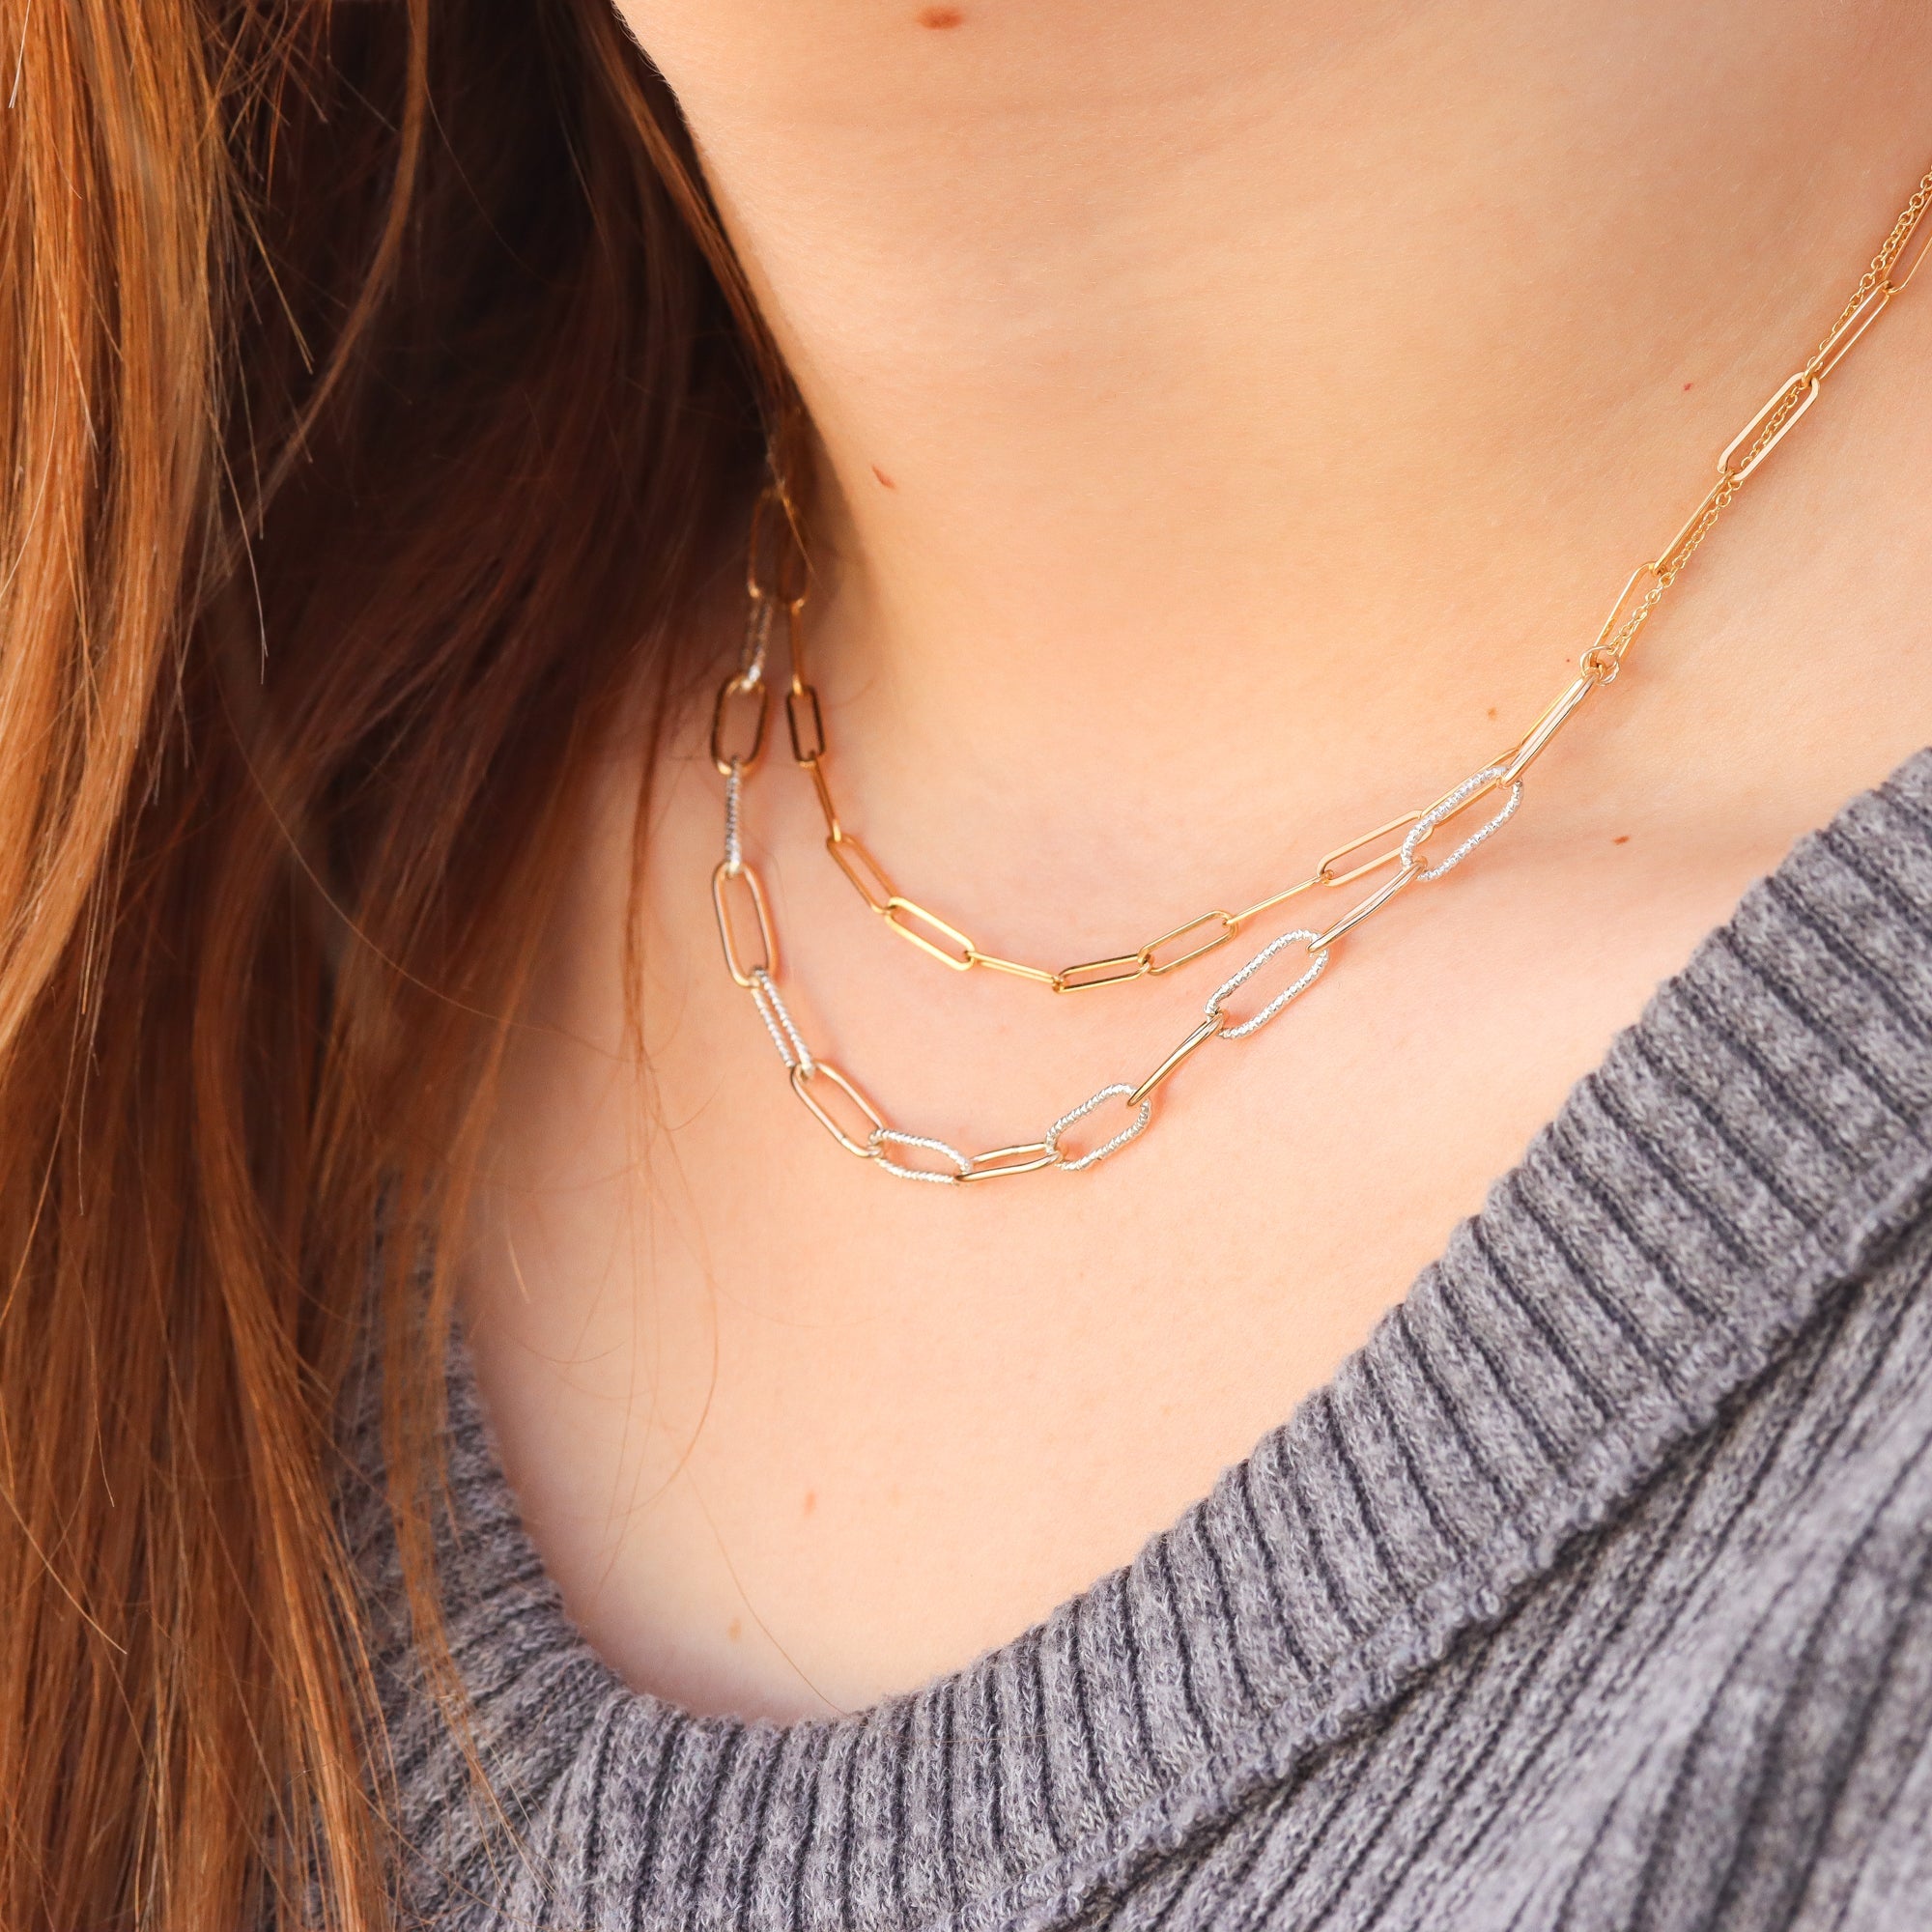 Chunky Paperclip Chain Necklace in Gold Fill and Silver - Mixed Metals Layering Necklace with Sparkle Faceting